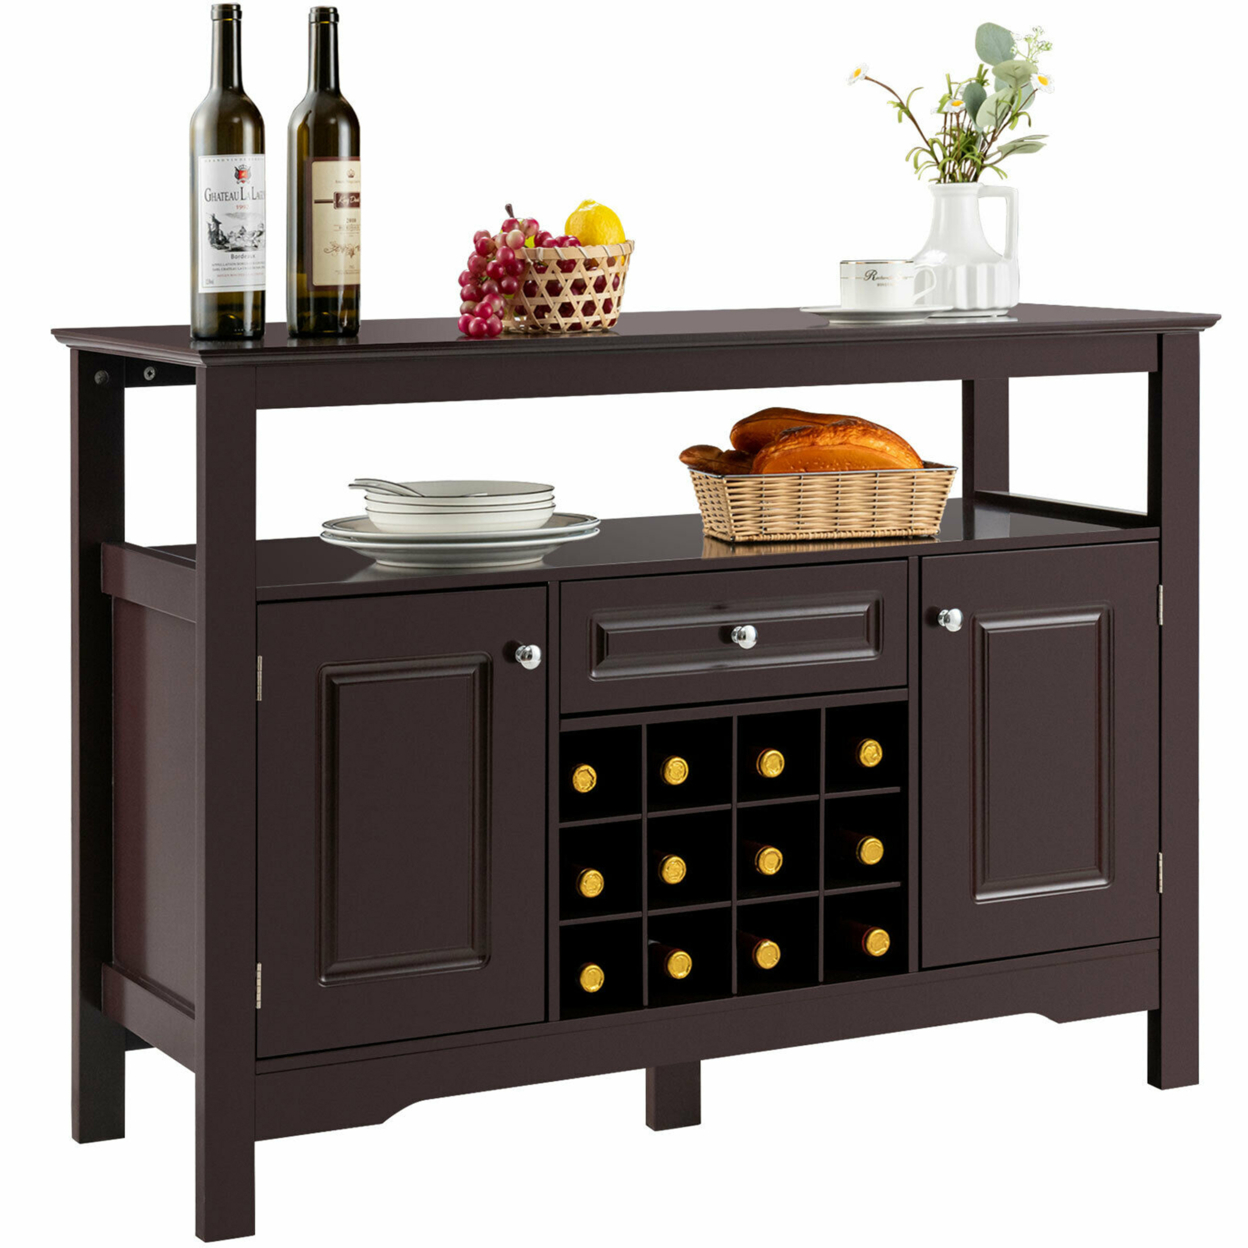 Storage Buffet Sideboard Table Kitchen Sever Cabinet Wine Rack - Brown